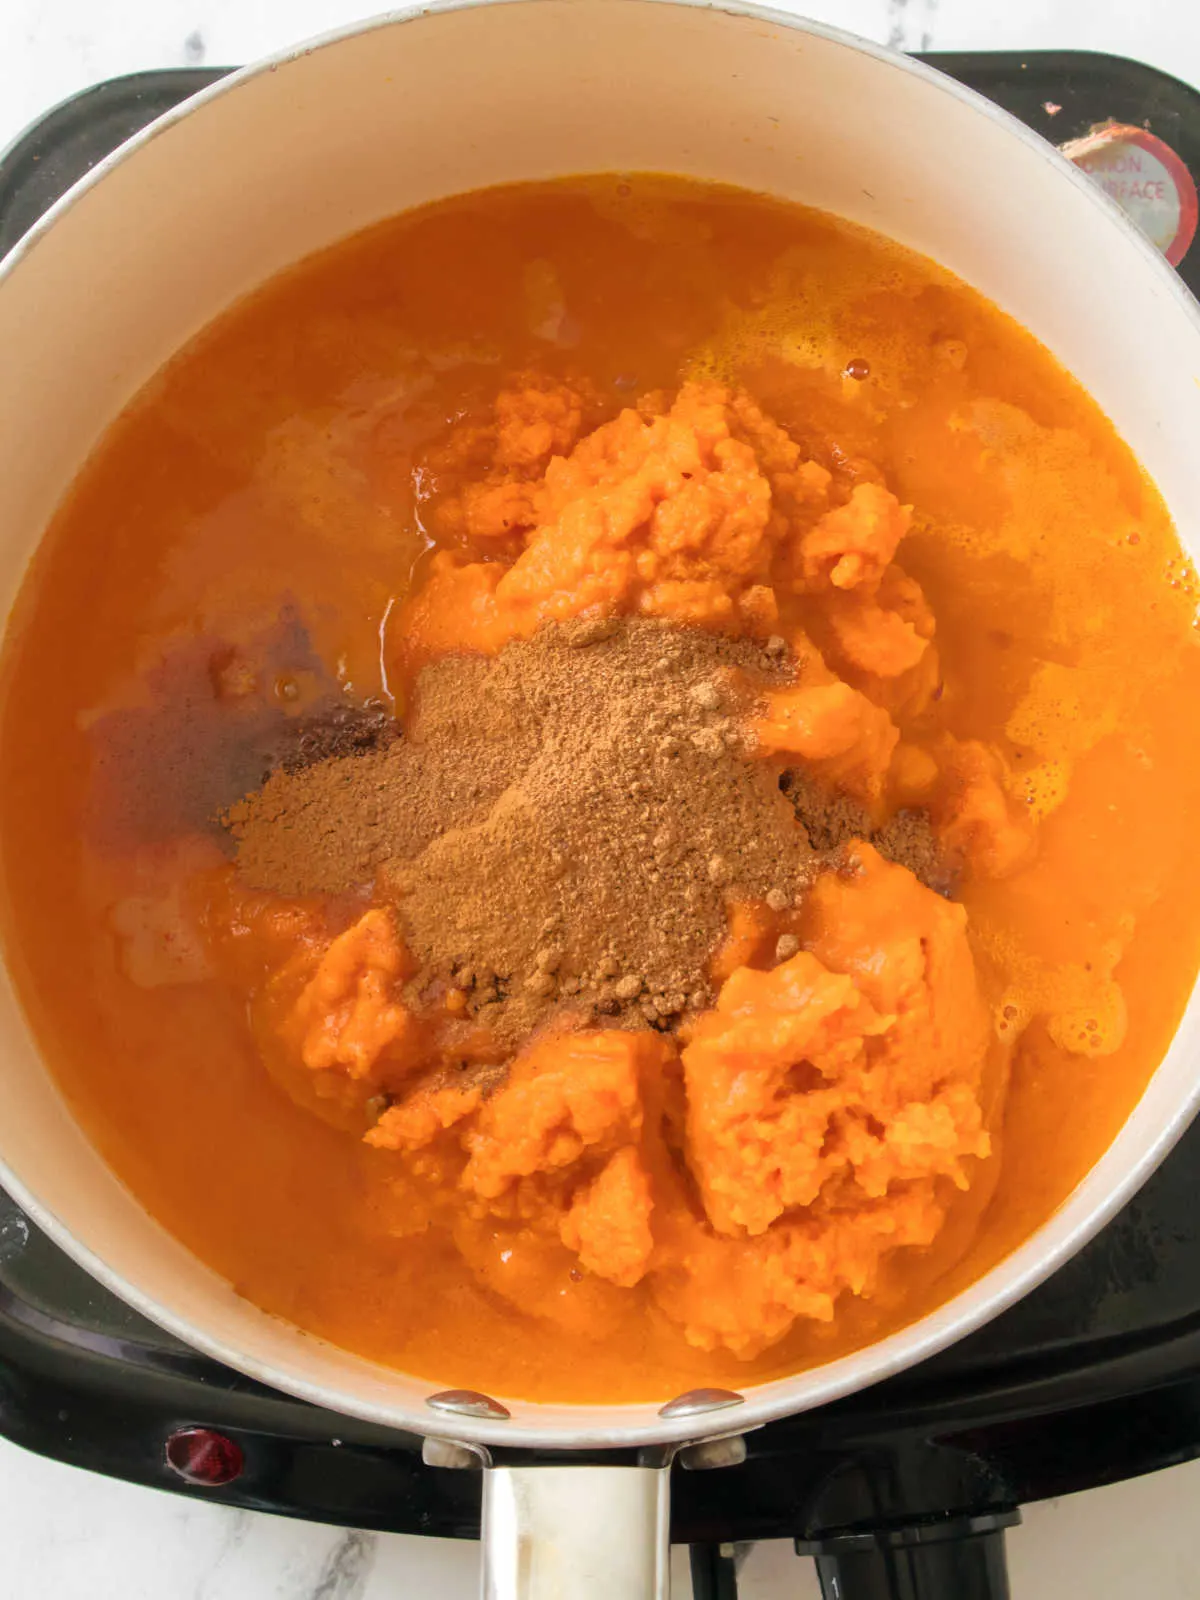 pumpkin puree, apple juice and spices in saucepan ready to be made into pumpkin butter.